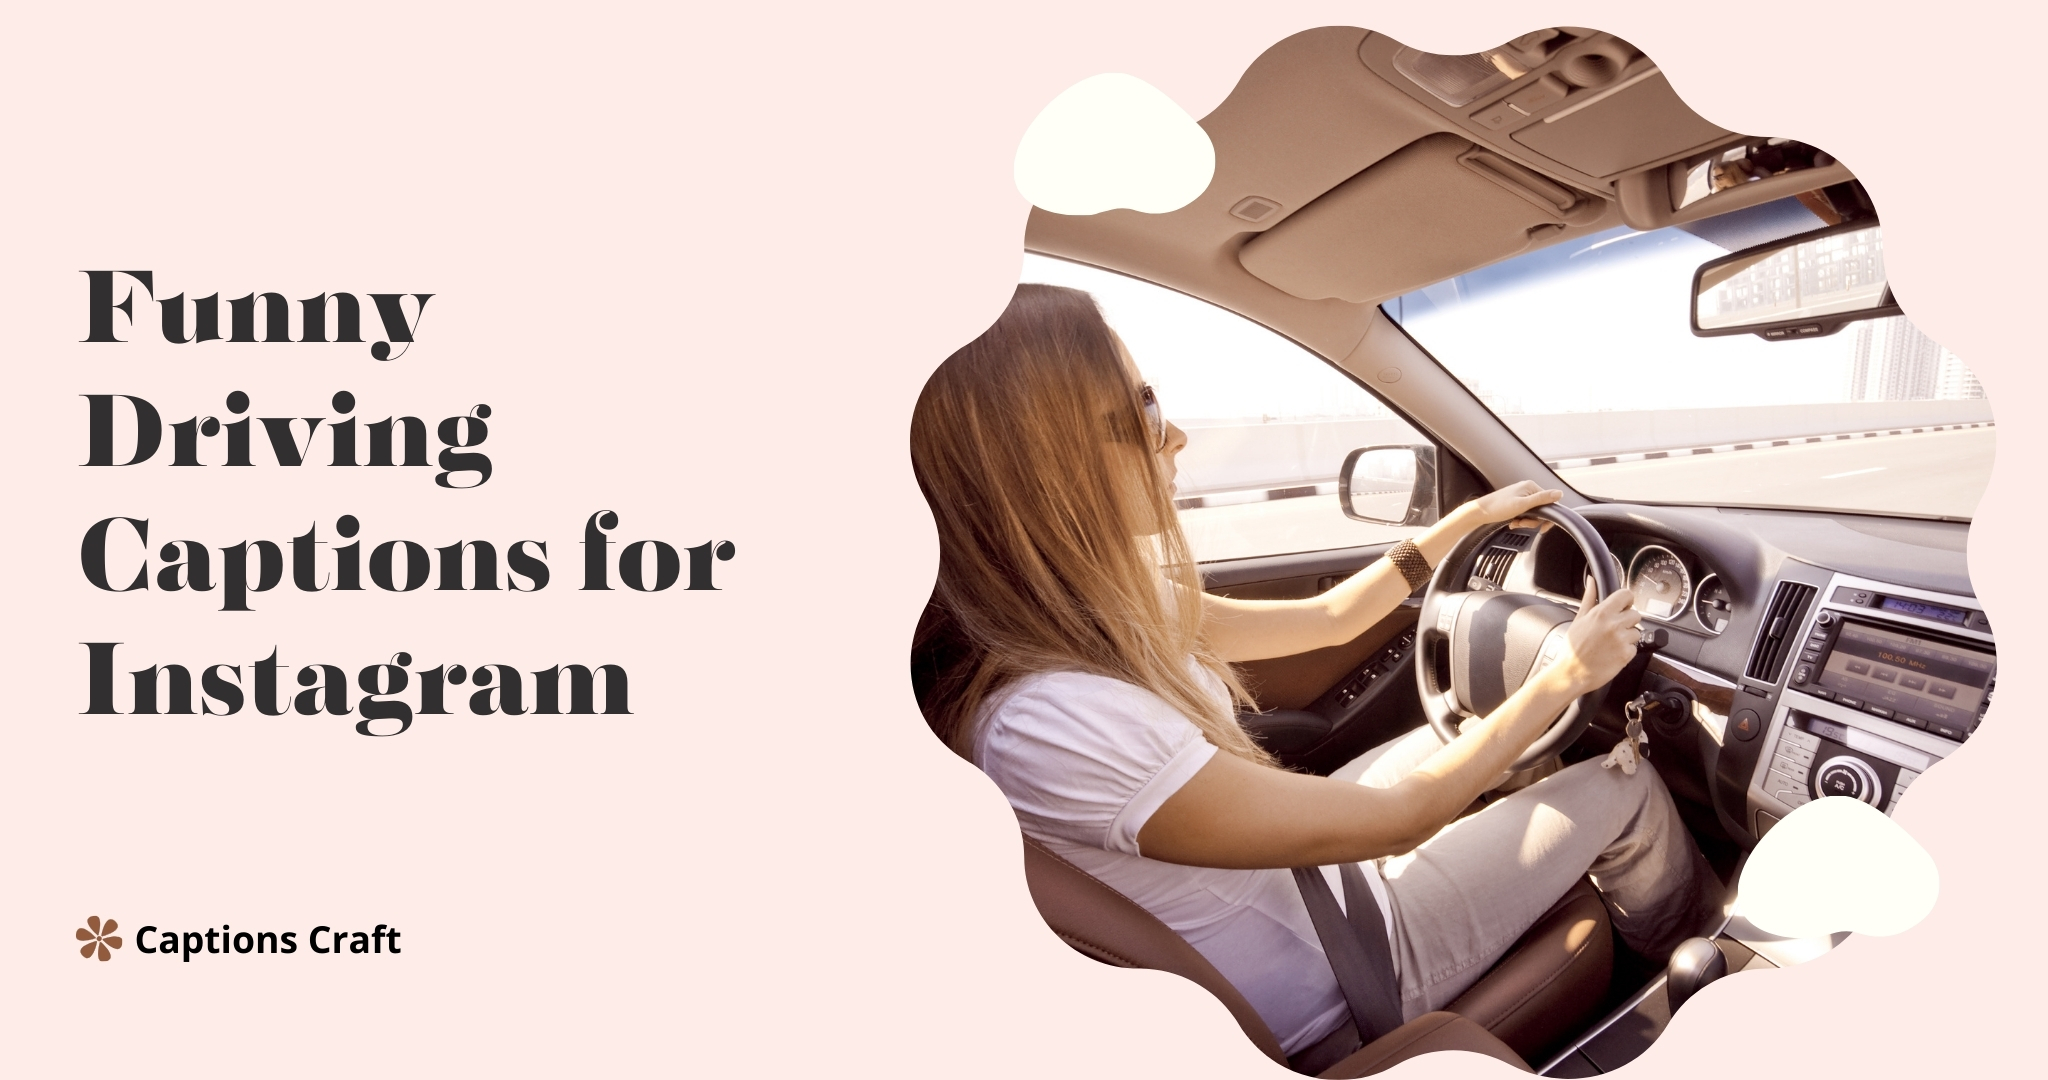 Funny driving captions for Instagram: "Cruising with laughter, buckle up for hilarious adventures! #DrivingHumor #InstagramLaughs"